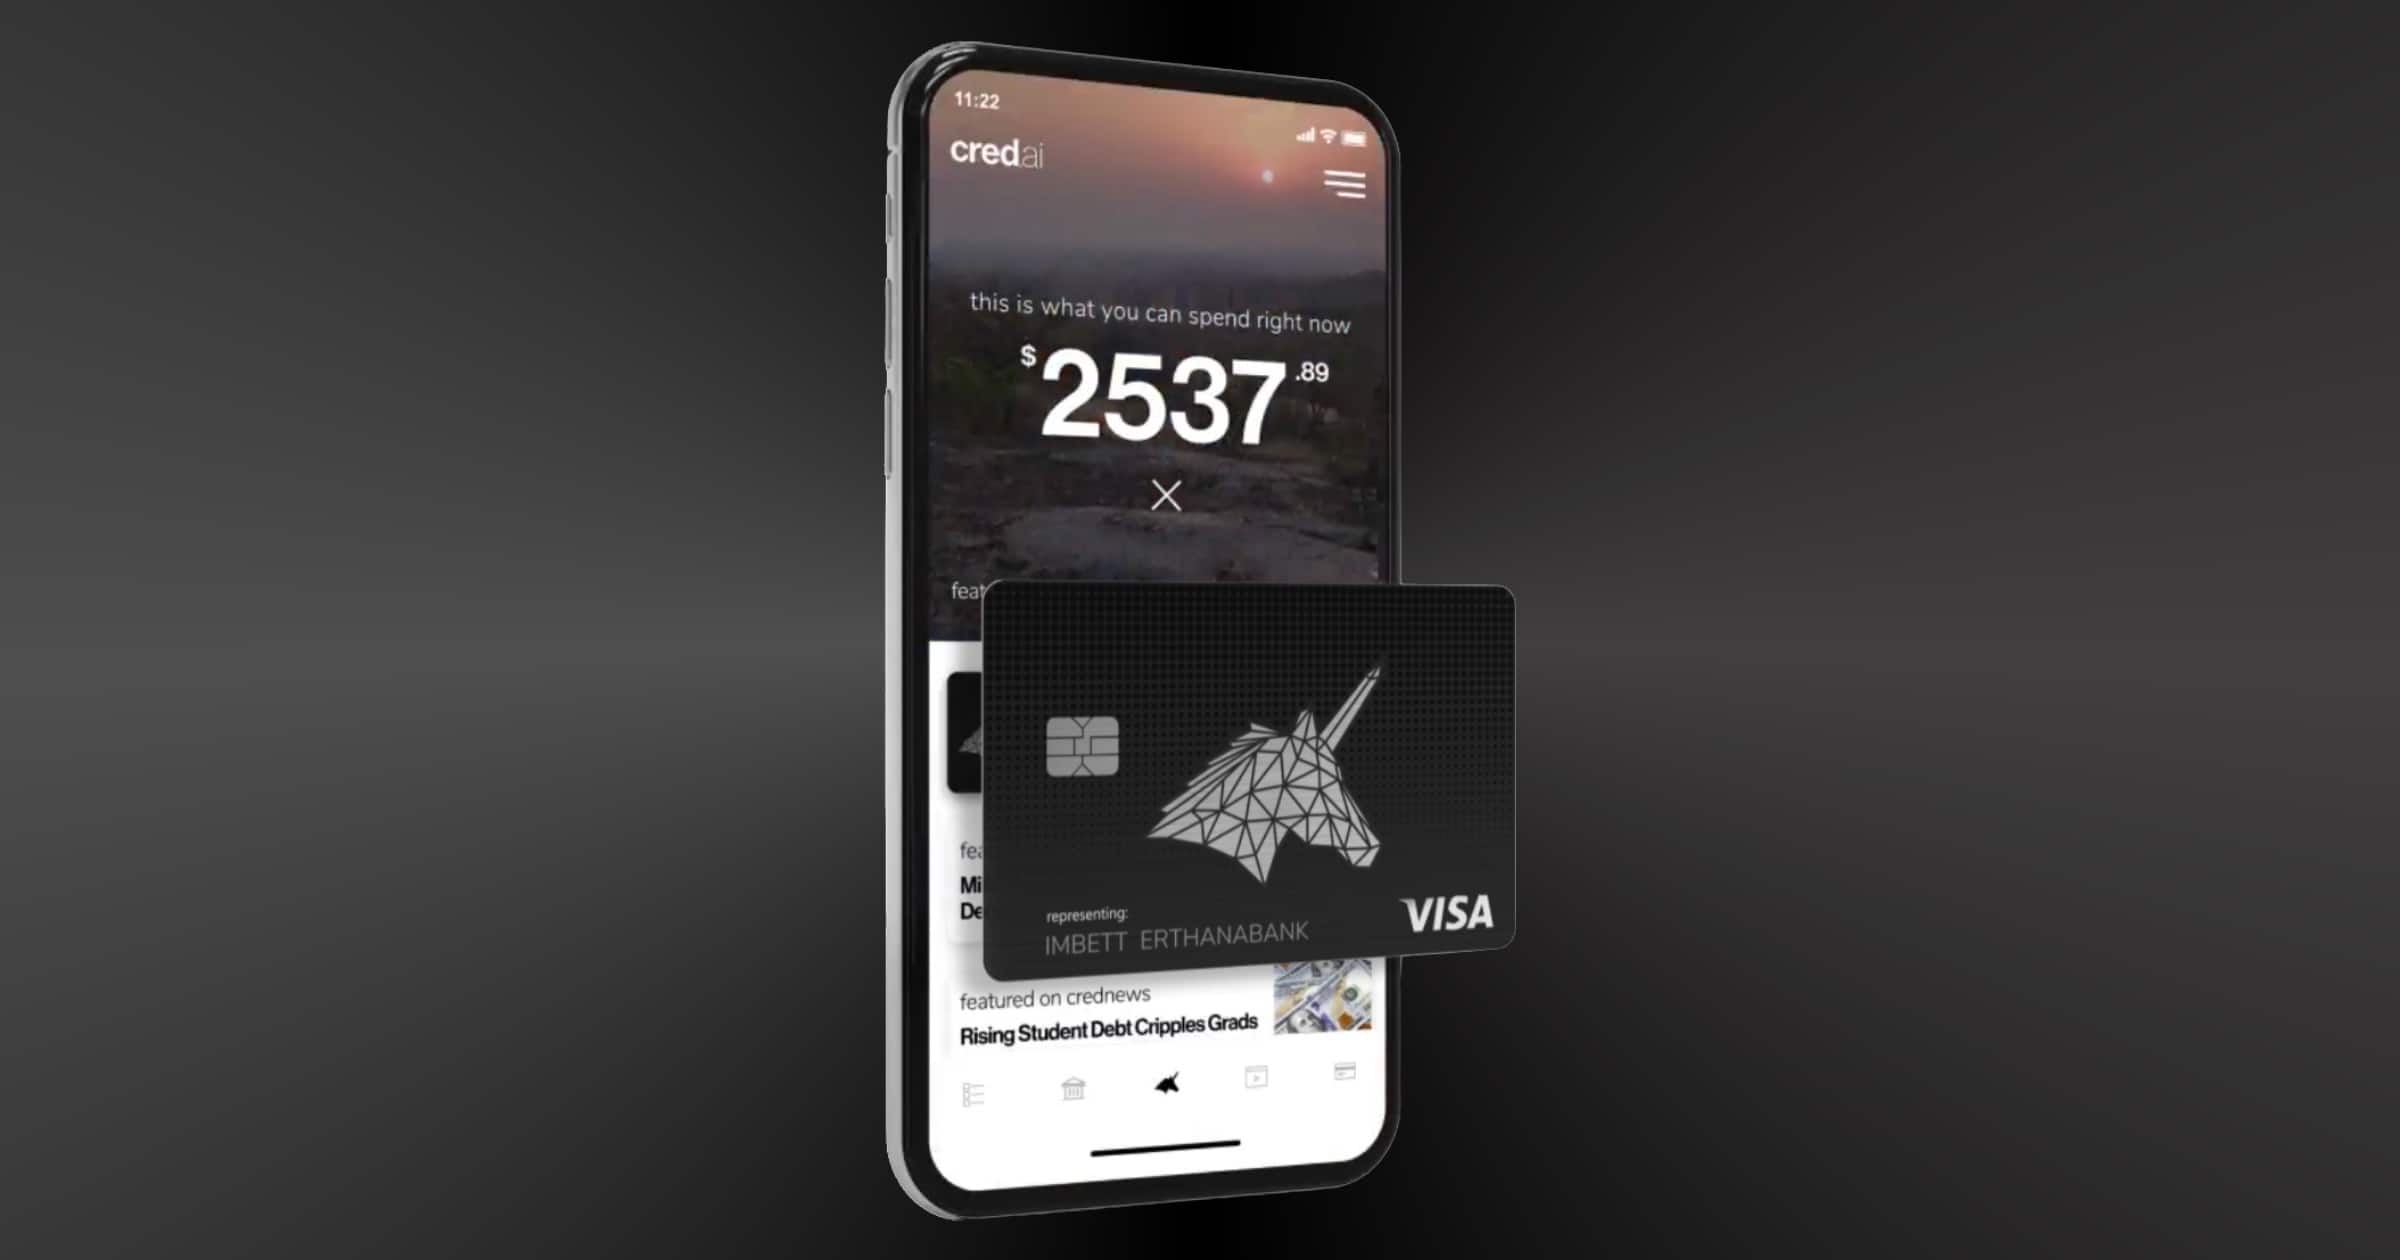 Cred.ai Offers a Unicorn Credit Card Powered by AI